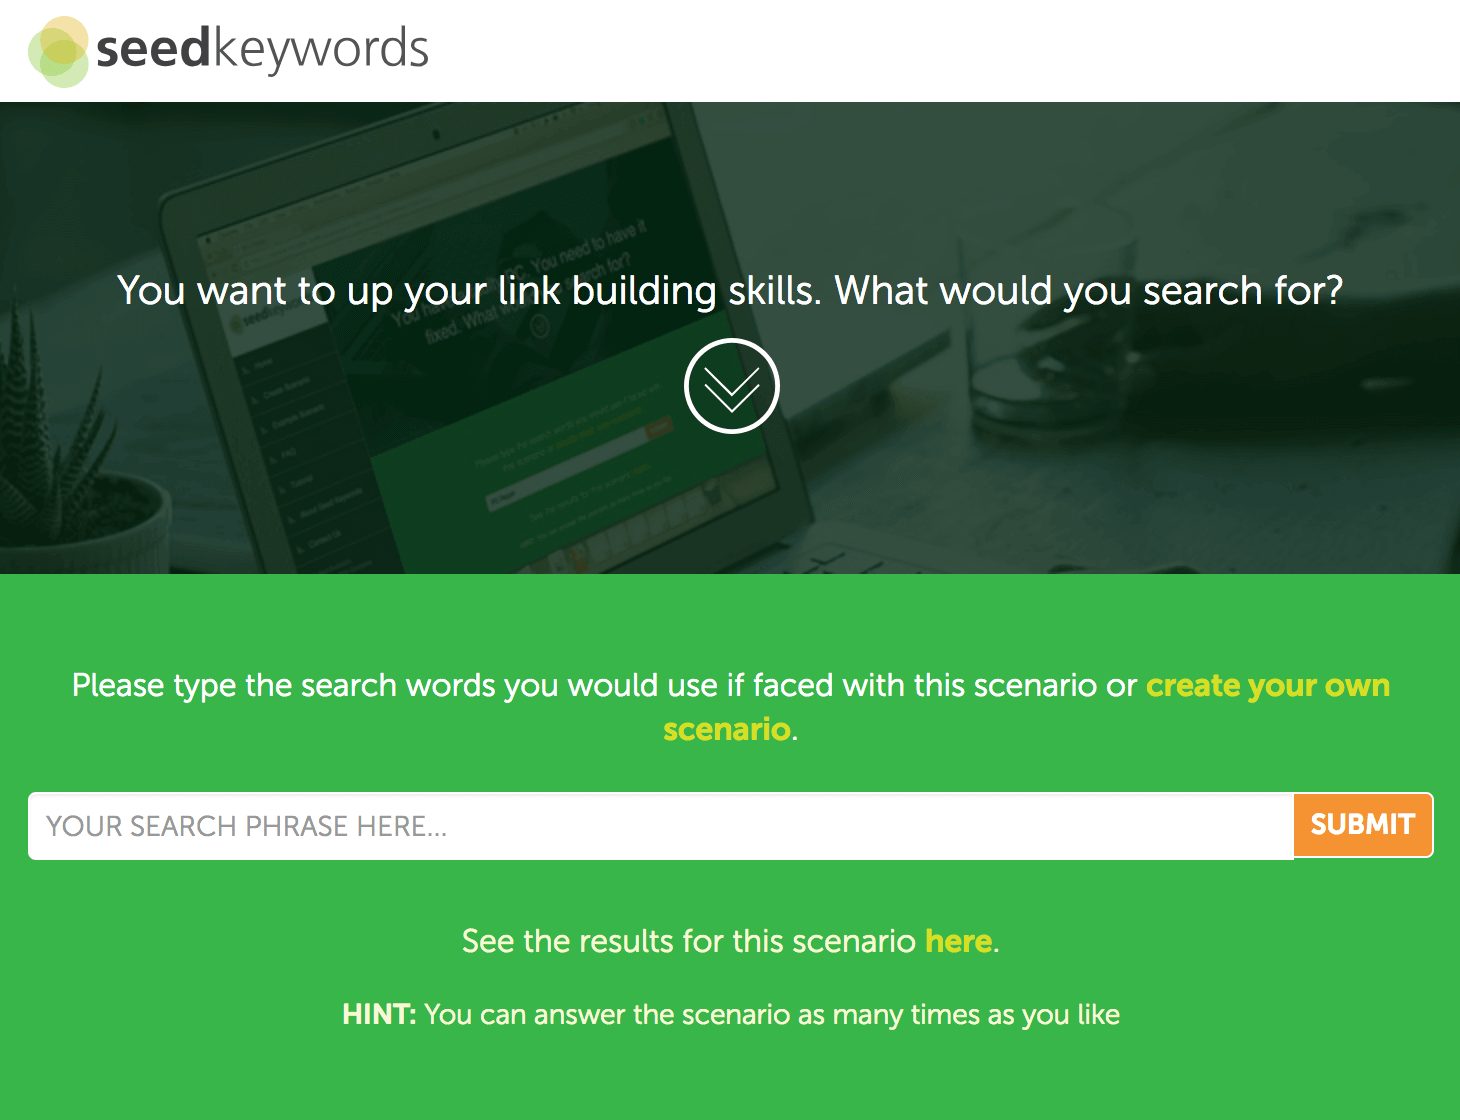 seedkeywords link clicked